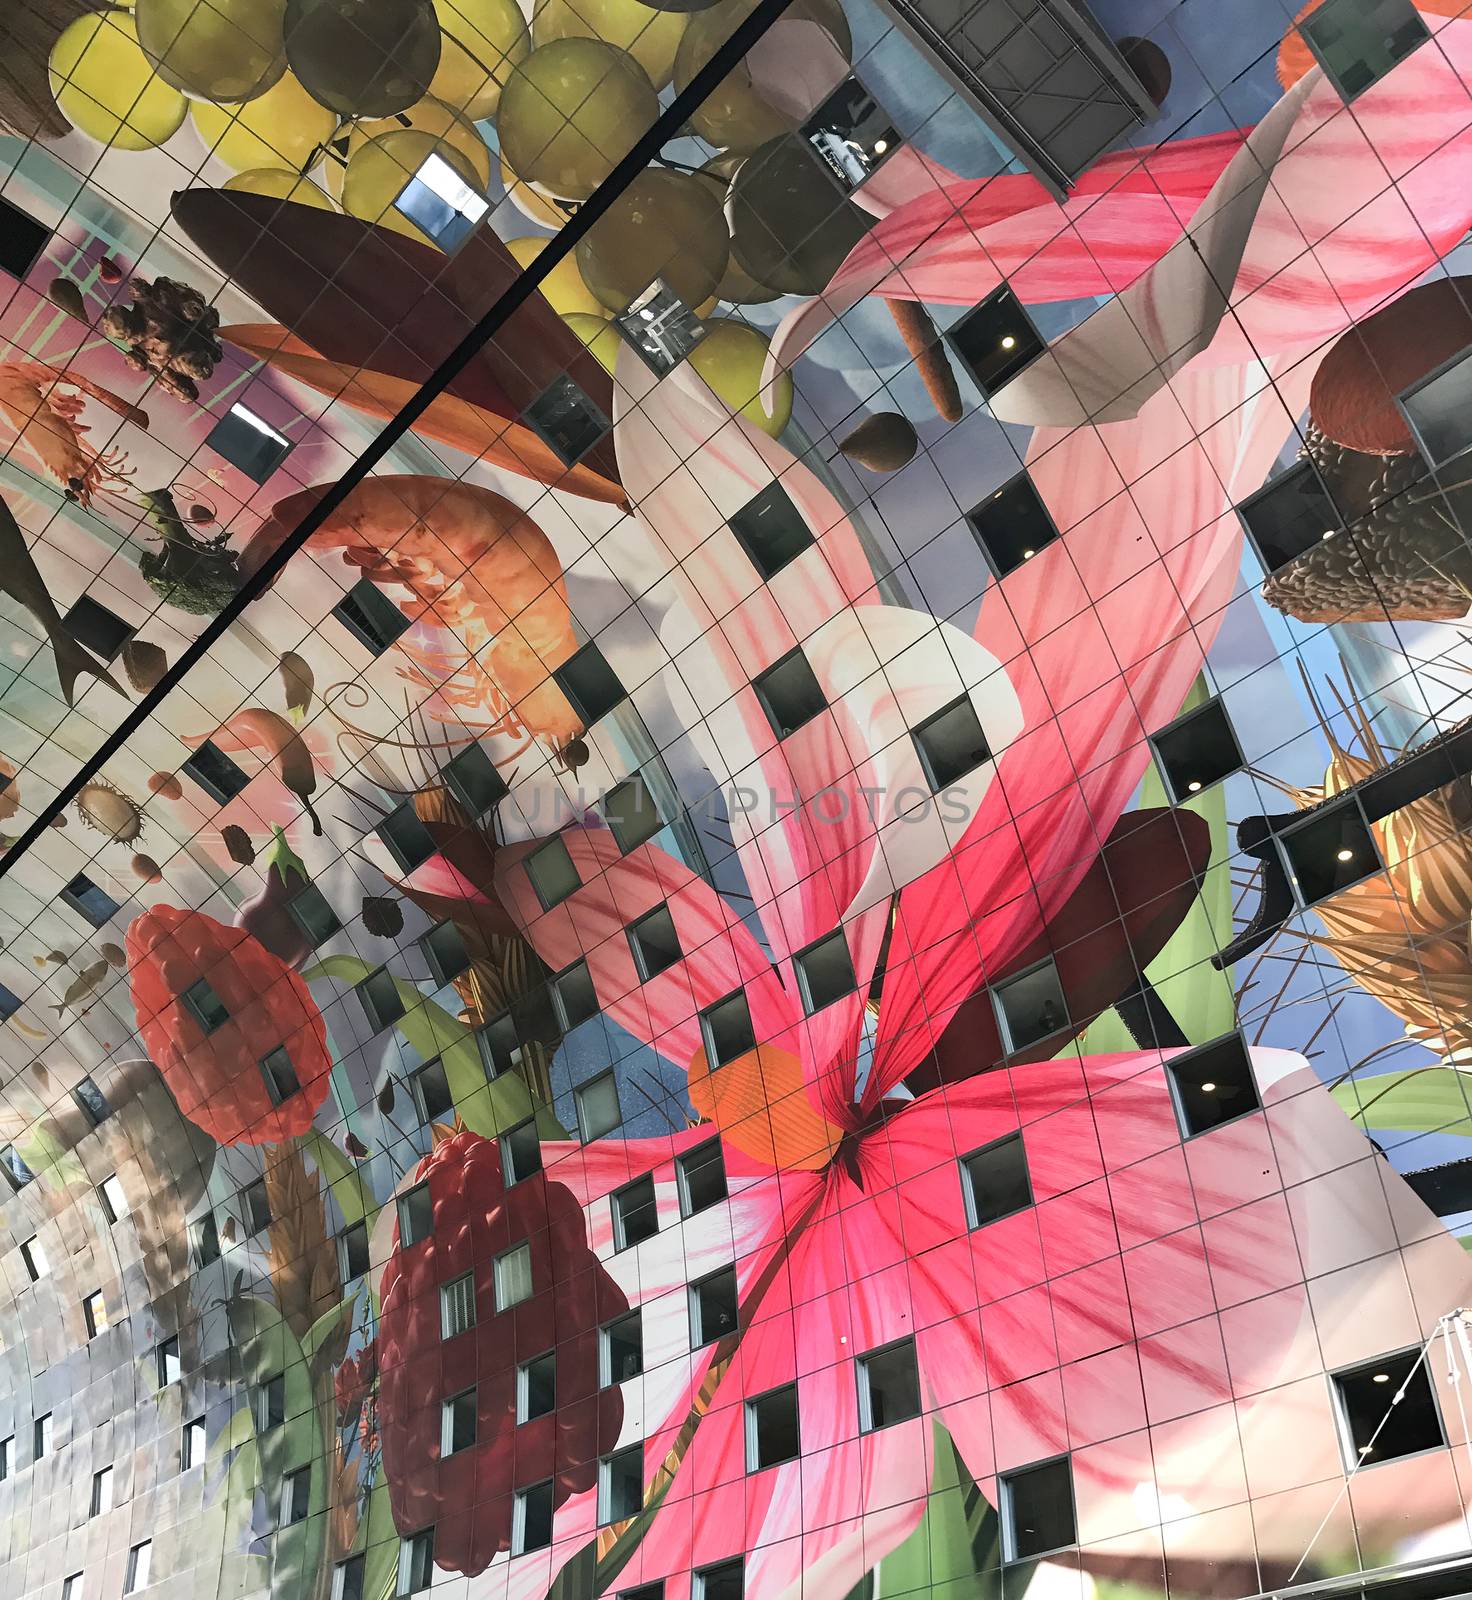 The colourful painted arch ceiling of the Markthal,  famous market hall in central Rotterdam